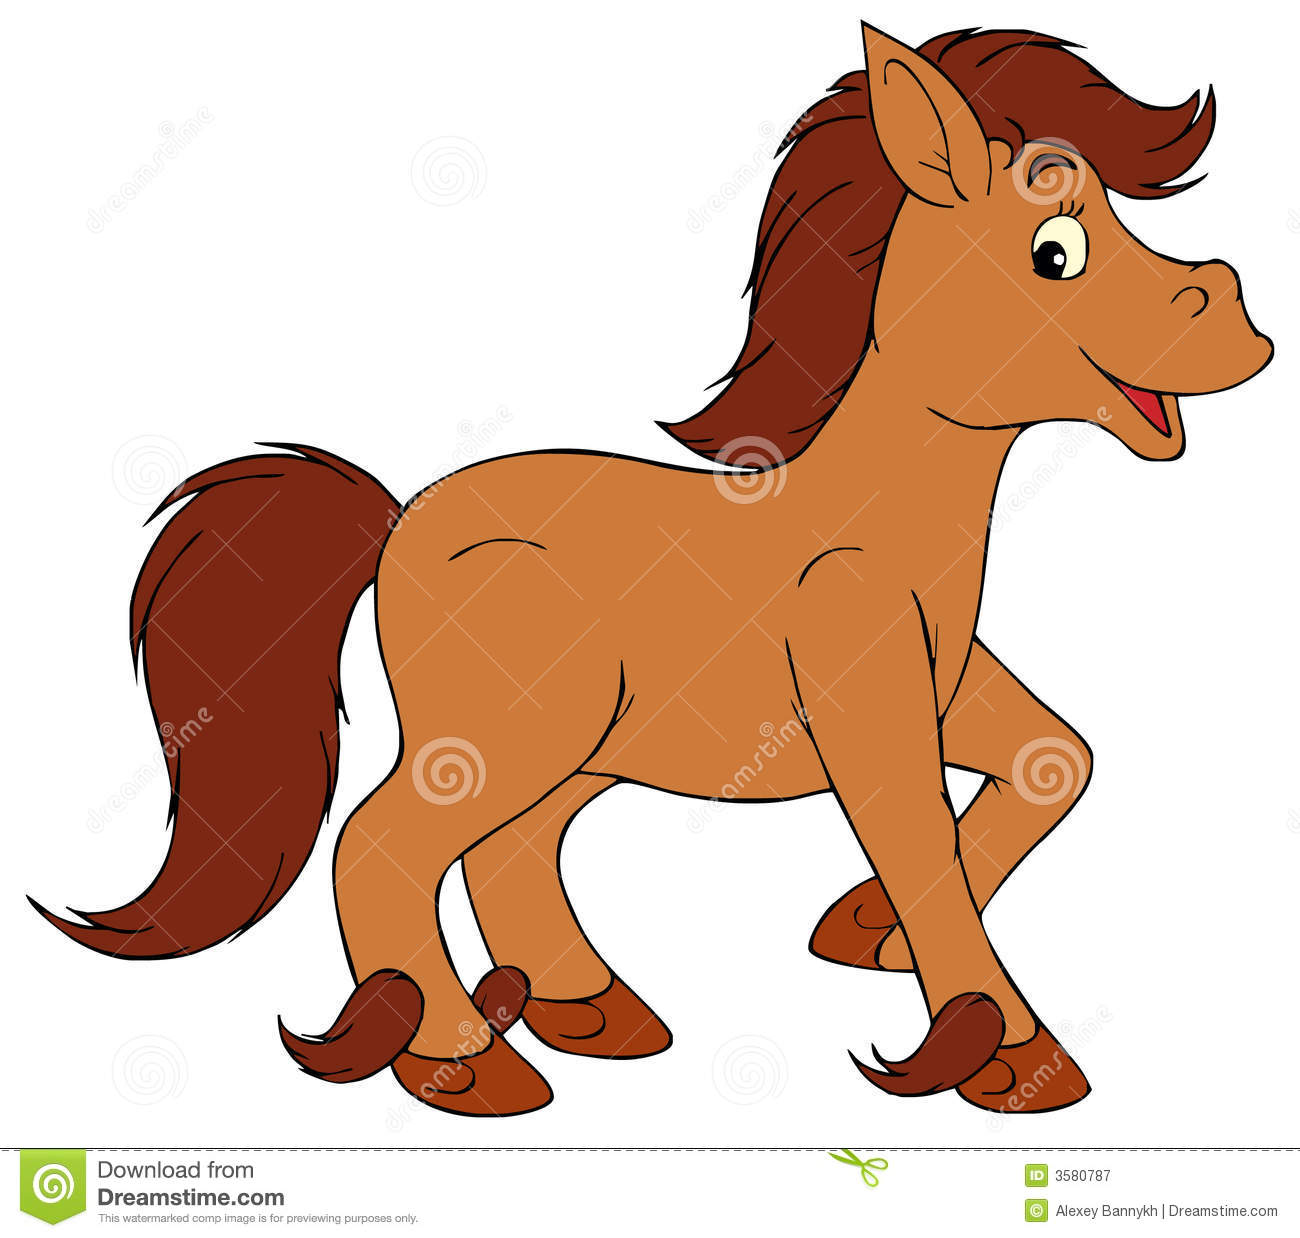 Foal clipart #12, Download drawings